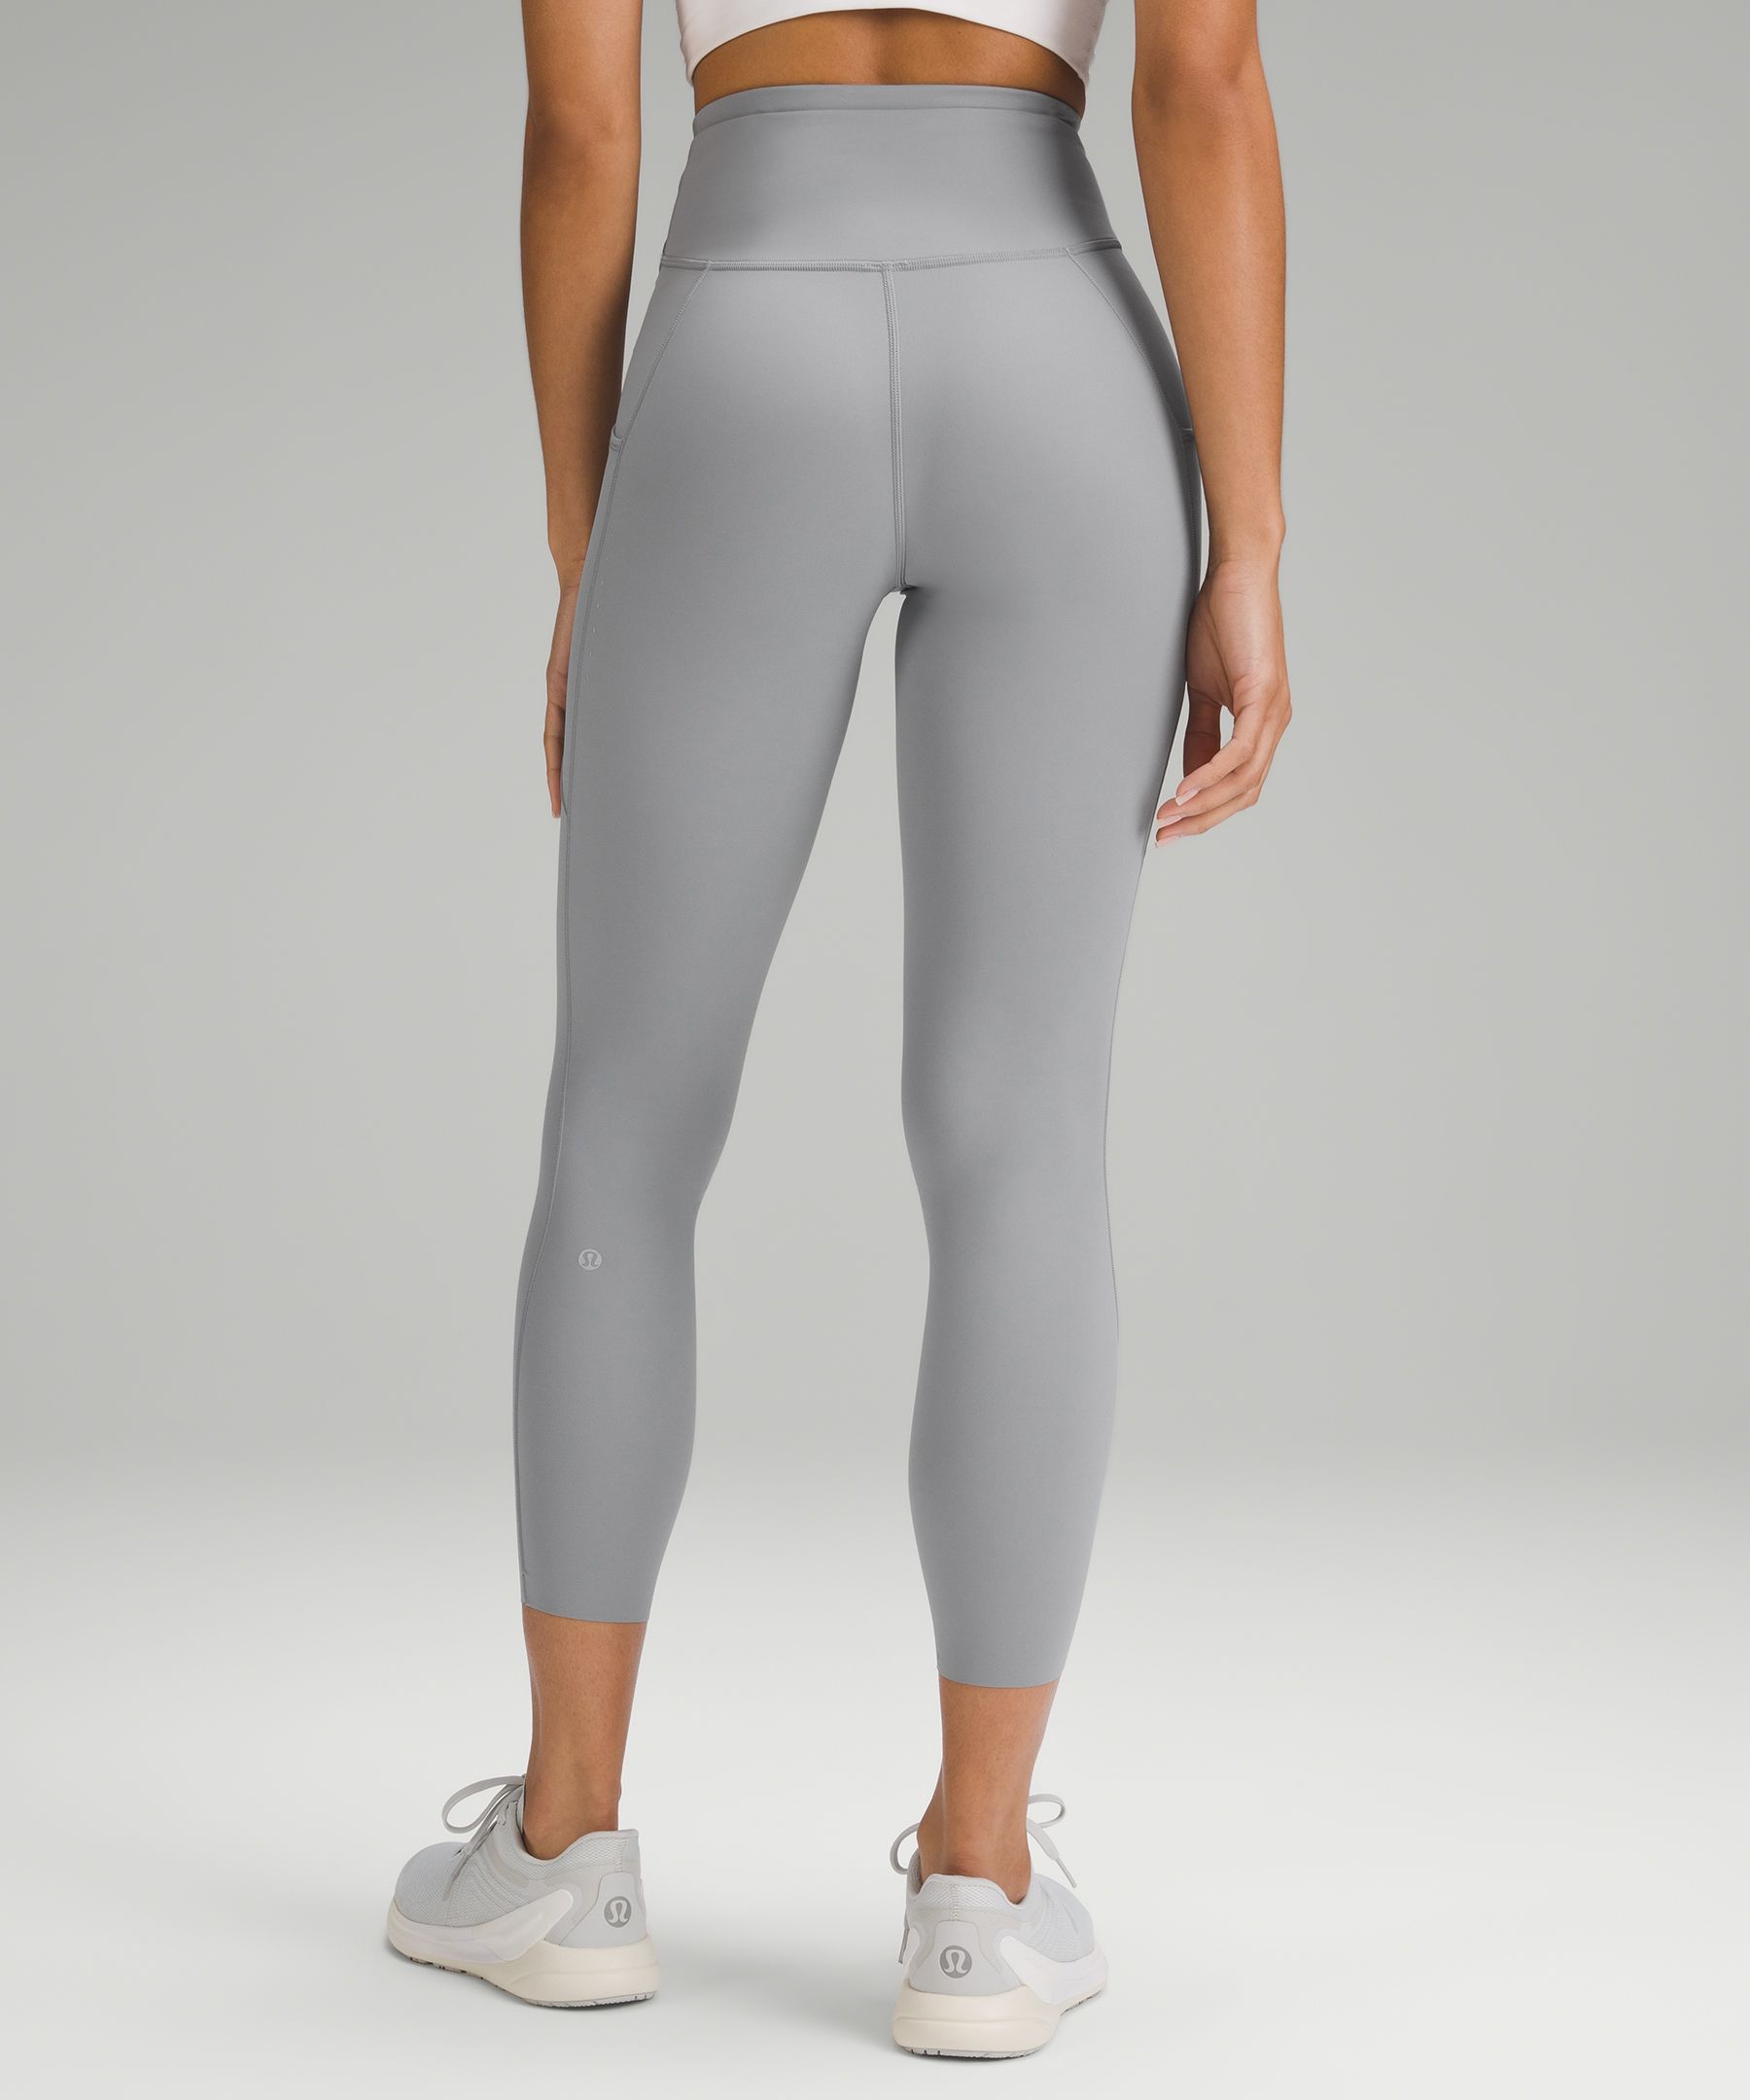 Are All Lululemon Leggings Reversible? Let's Find Out! - Playbite